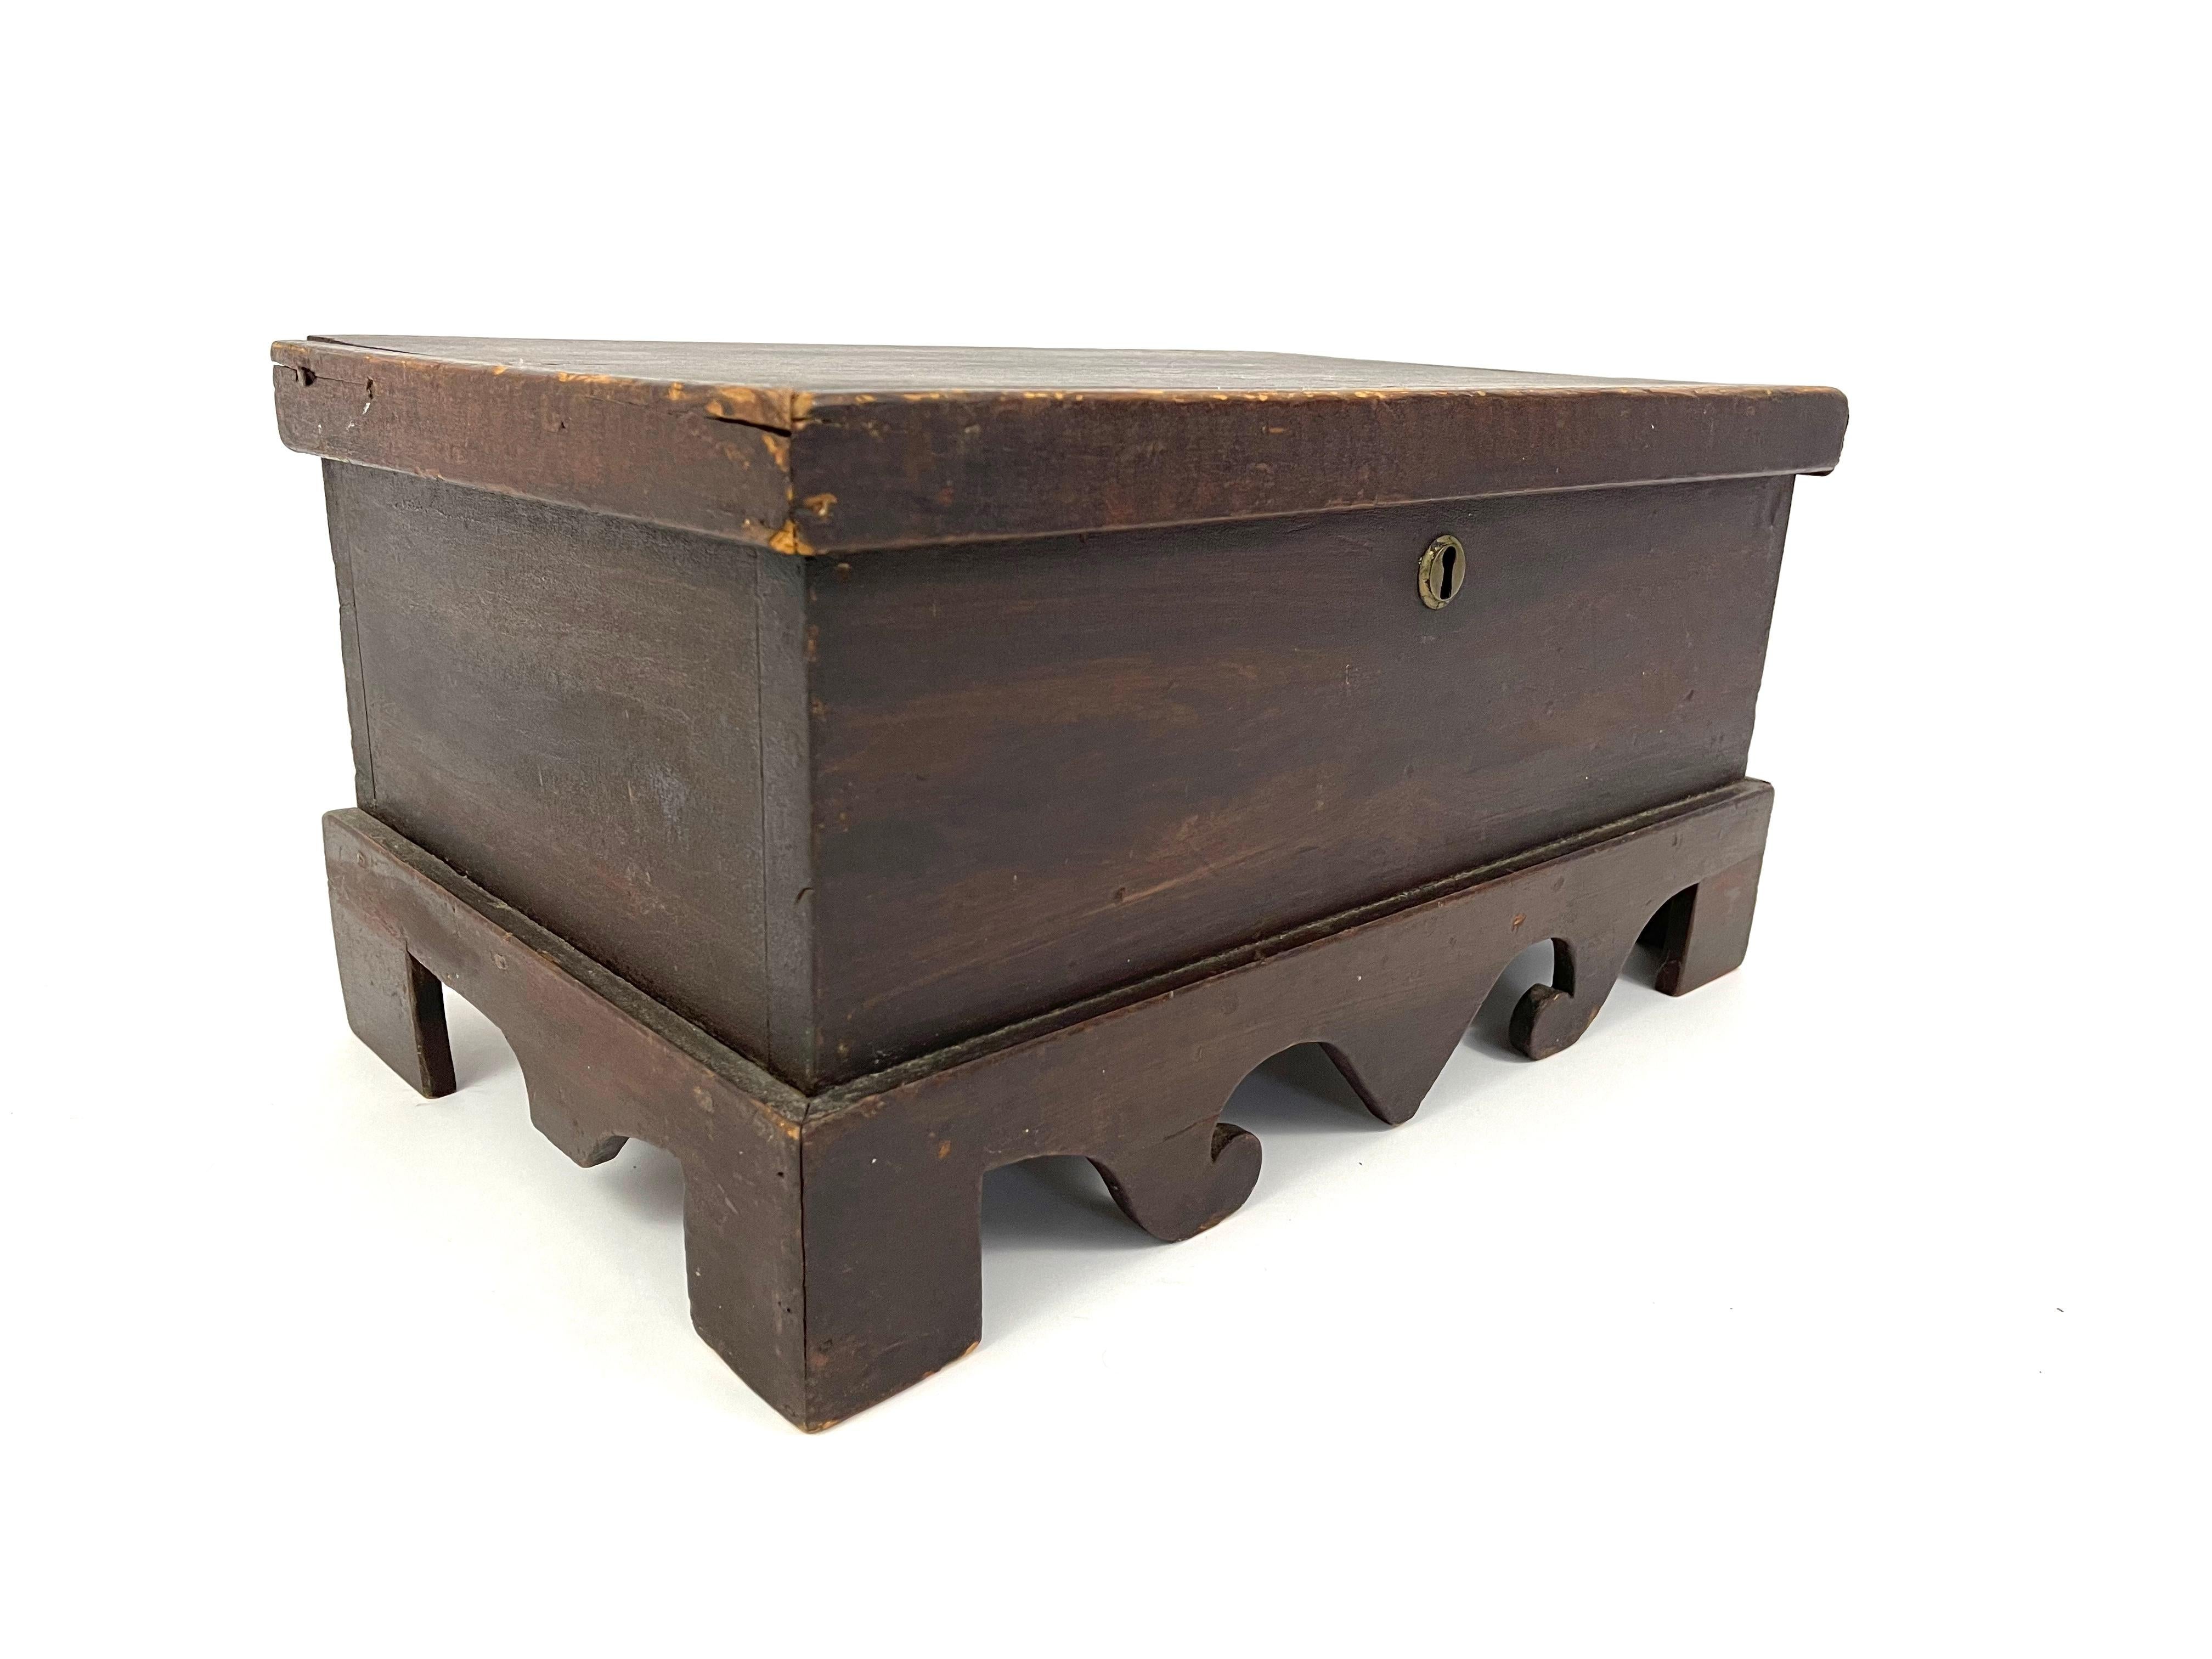 An unusual and sculptural early 19th century grain painted pine box, of rectangular form, with lift top lid, attached to a base with bracket feet and whimsical scrolled cutout decoration (like an inverted swan's neck pediment). Wonderful old, dry